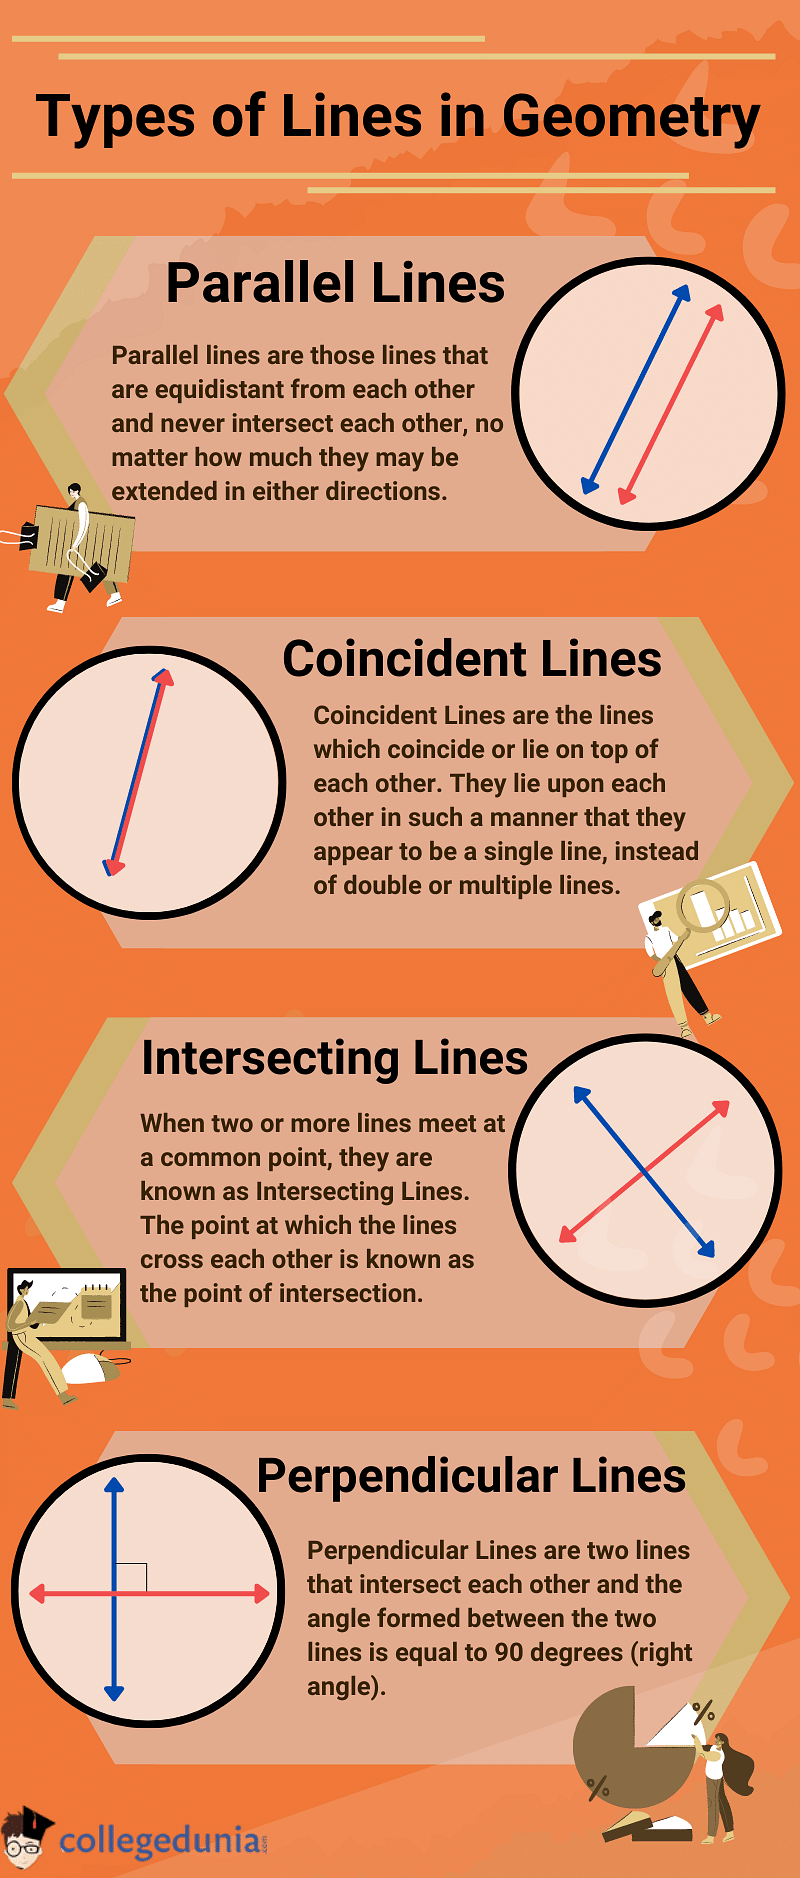 Coincident Lines: Definition, Equation, Formula & Examples